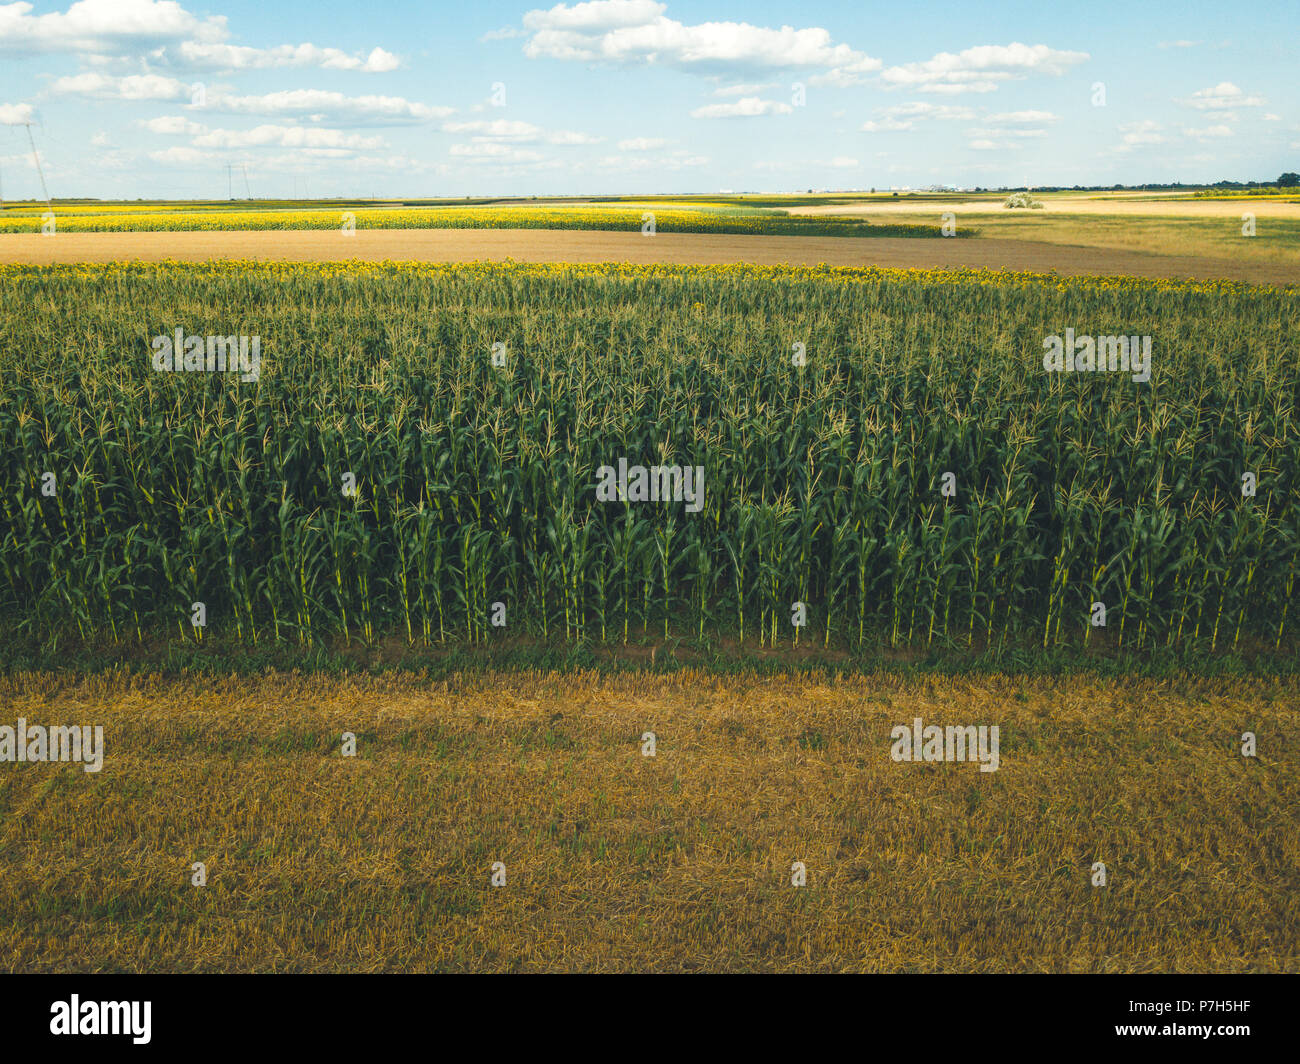 Aerial view of cultivated maize crops growing in cornfield Stock Photo